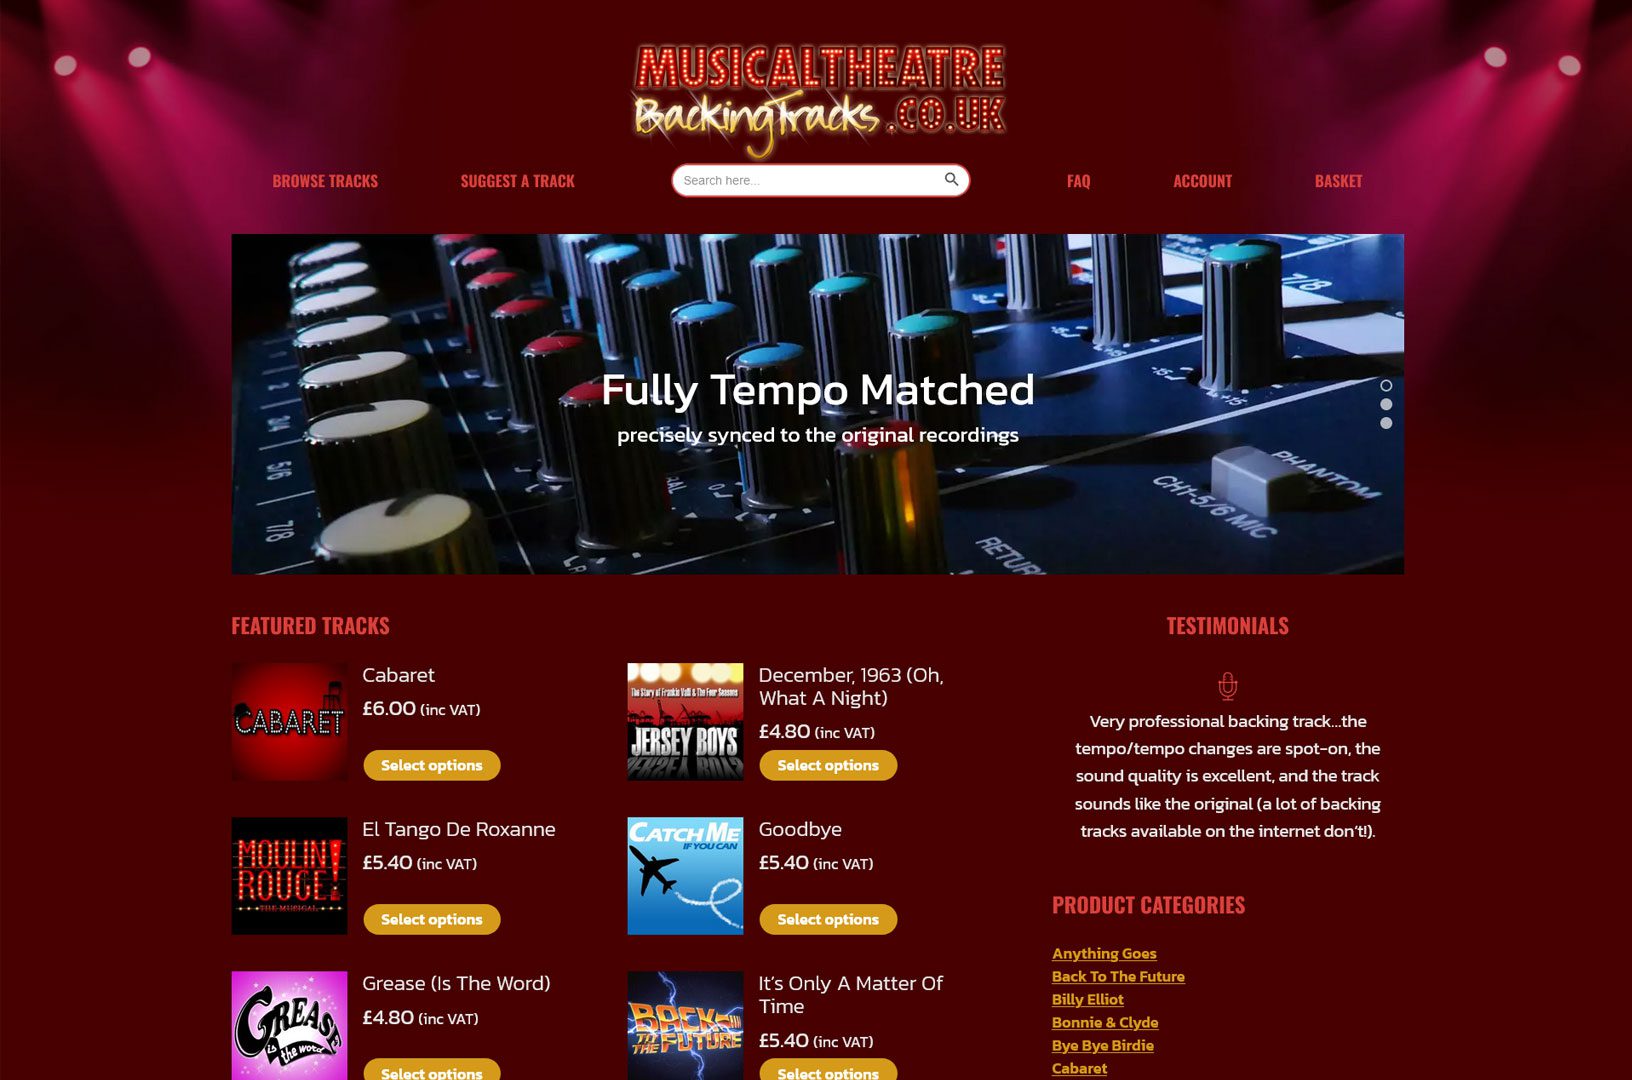 Musical Theatre Backing Tracks website home page